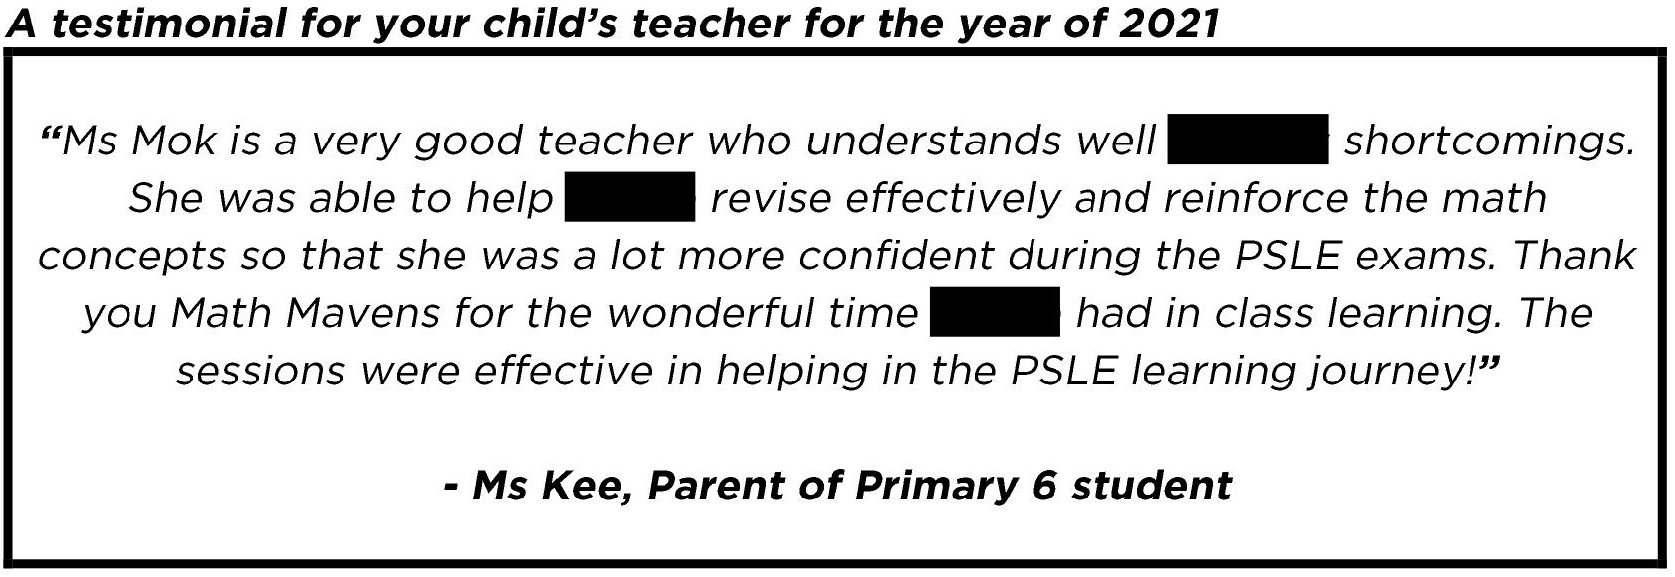 "...she was a lot more confident during the PSLE exams."